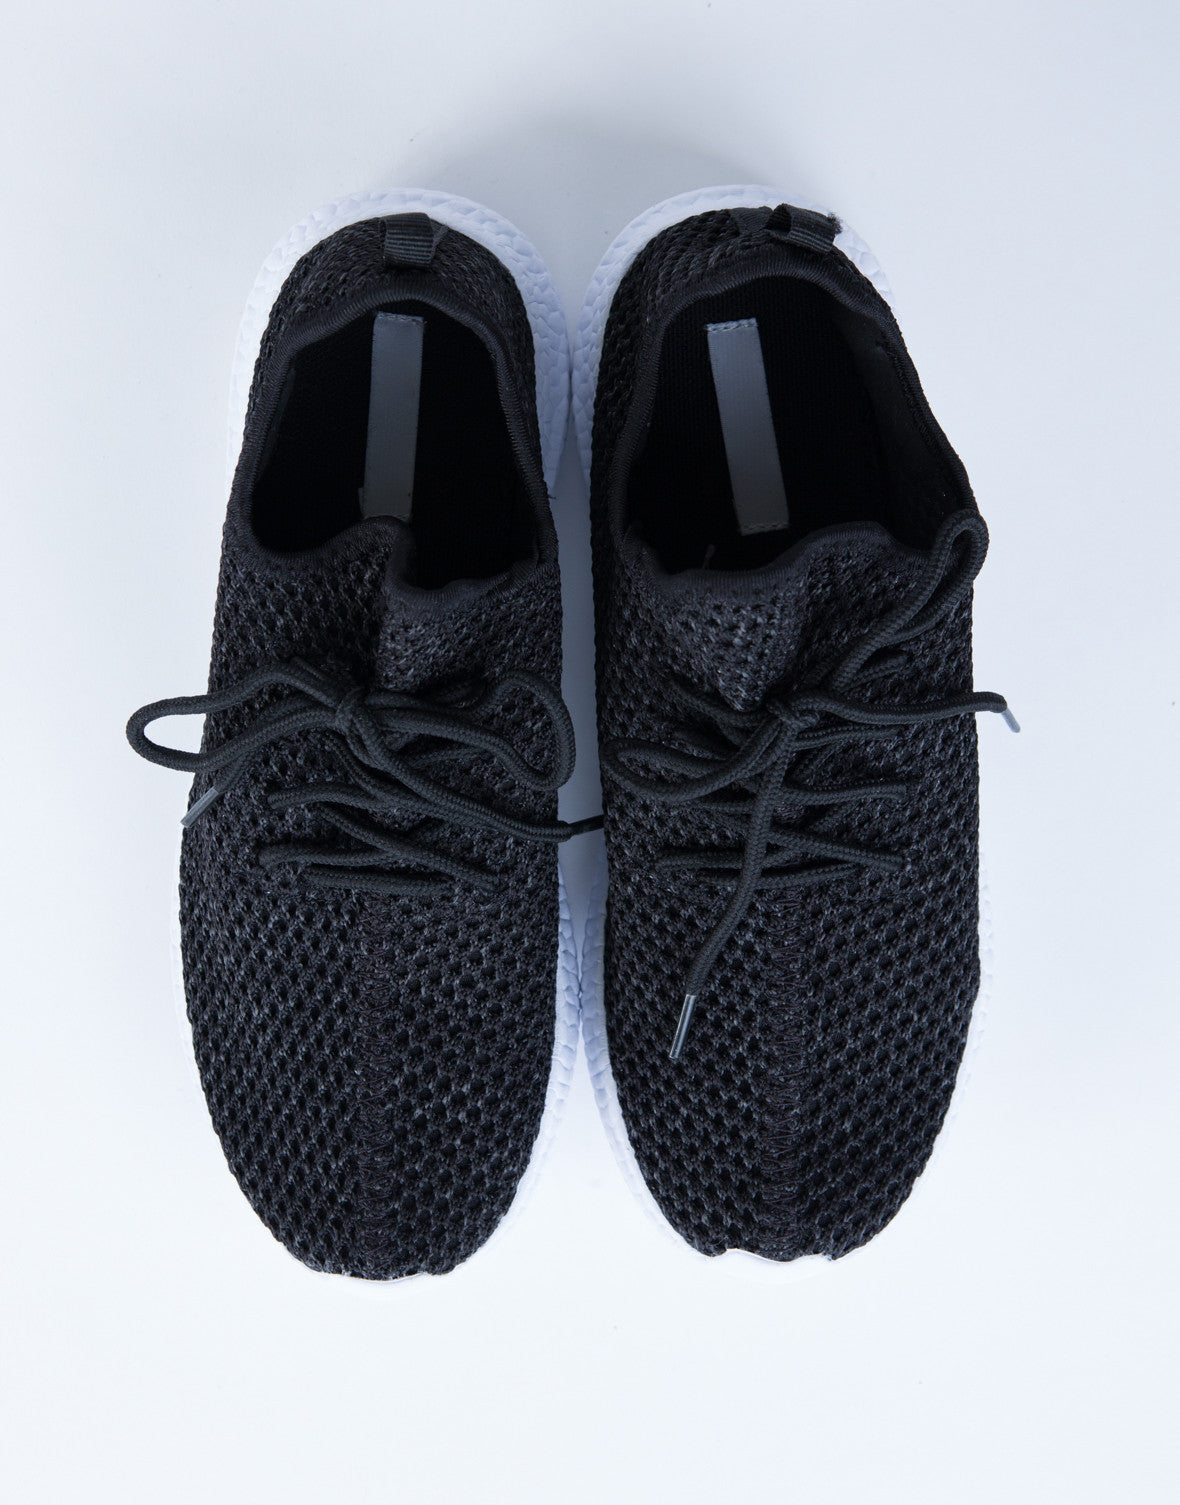 Sporty Knit Sneakers - Black Knit Sneakers - Lace Up Sneakers – 2020AVE